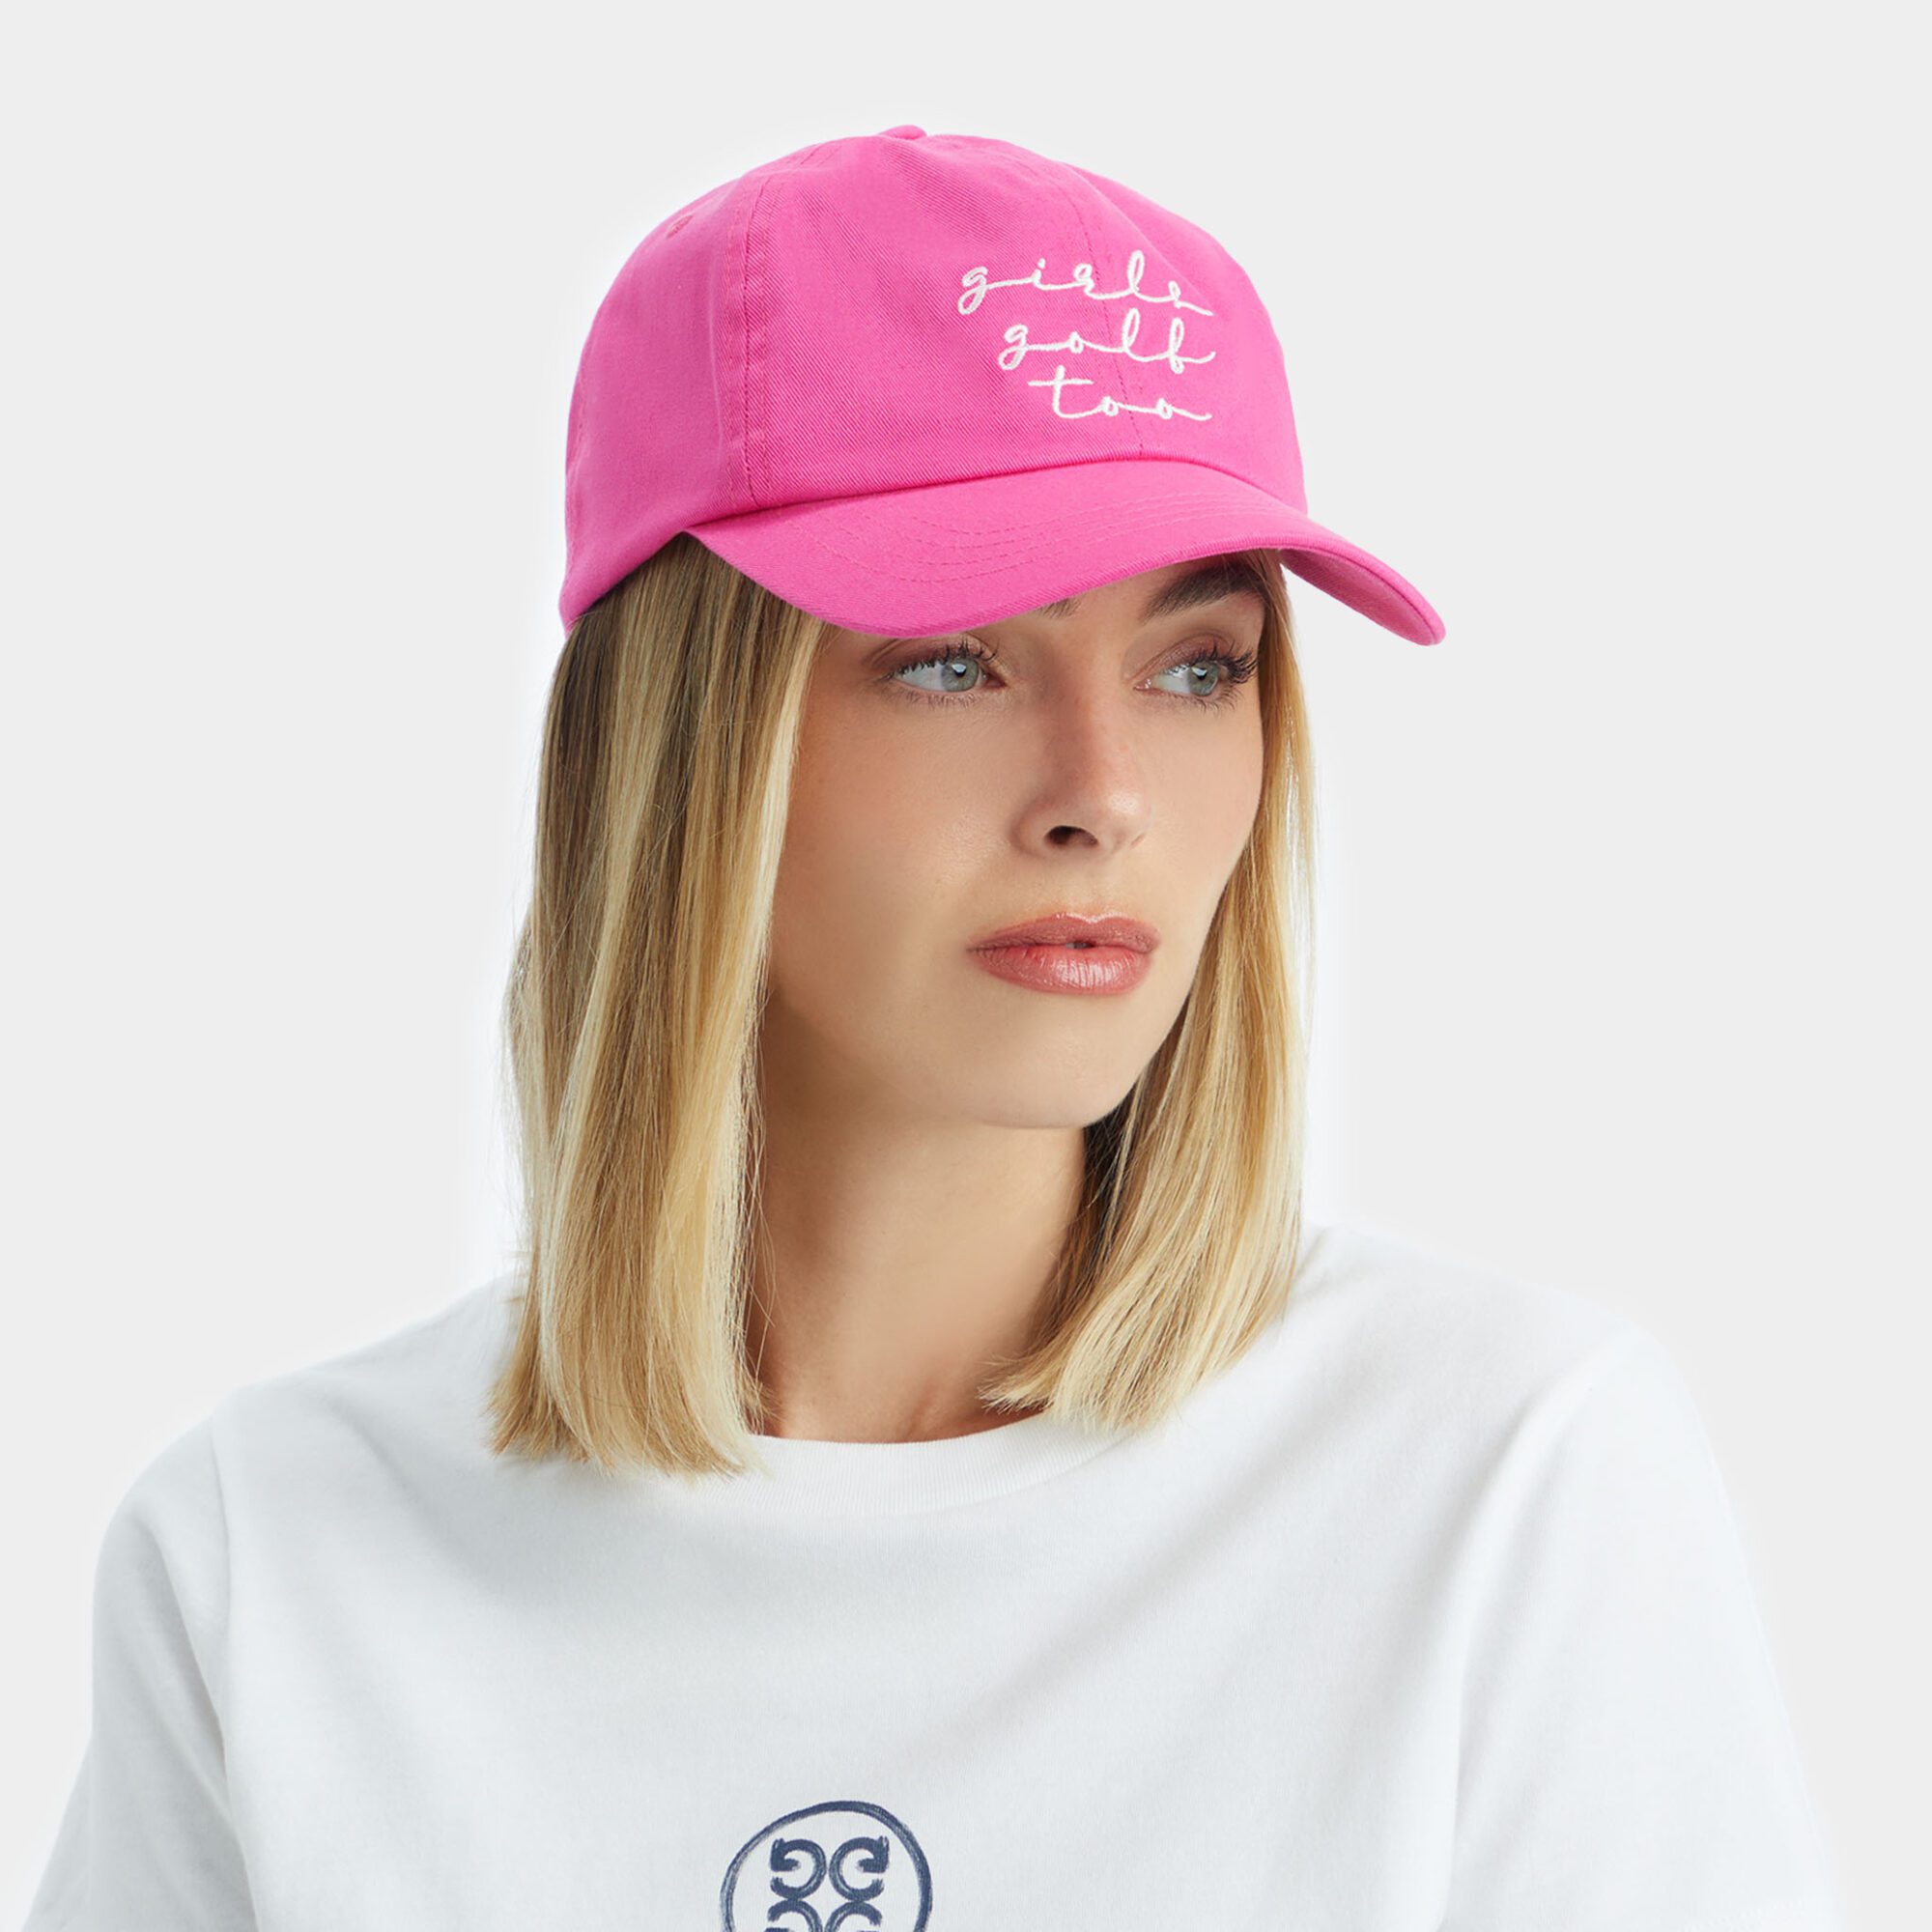 GIRLS GOLF TOO COTTON TWILL RELAXED FIT SNAPBACK HAT - Breakingpar